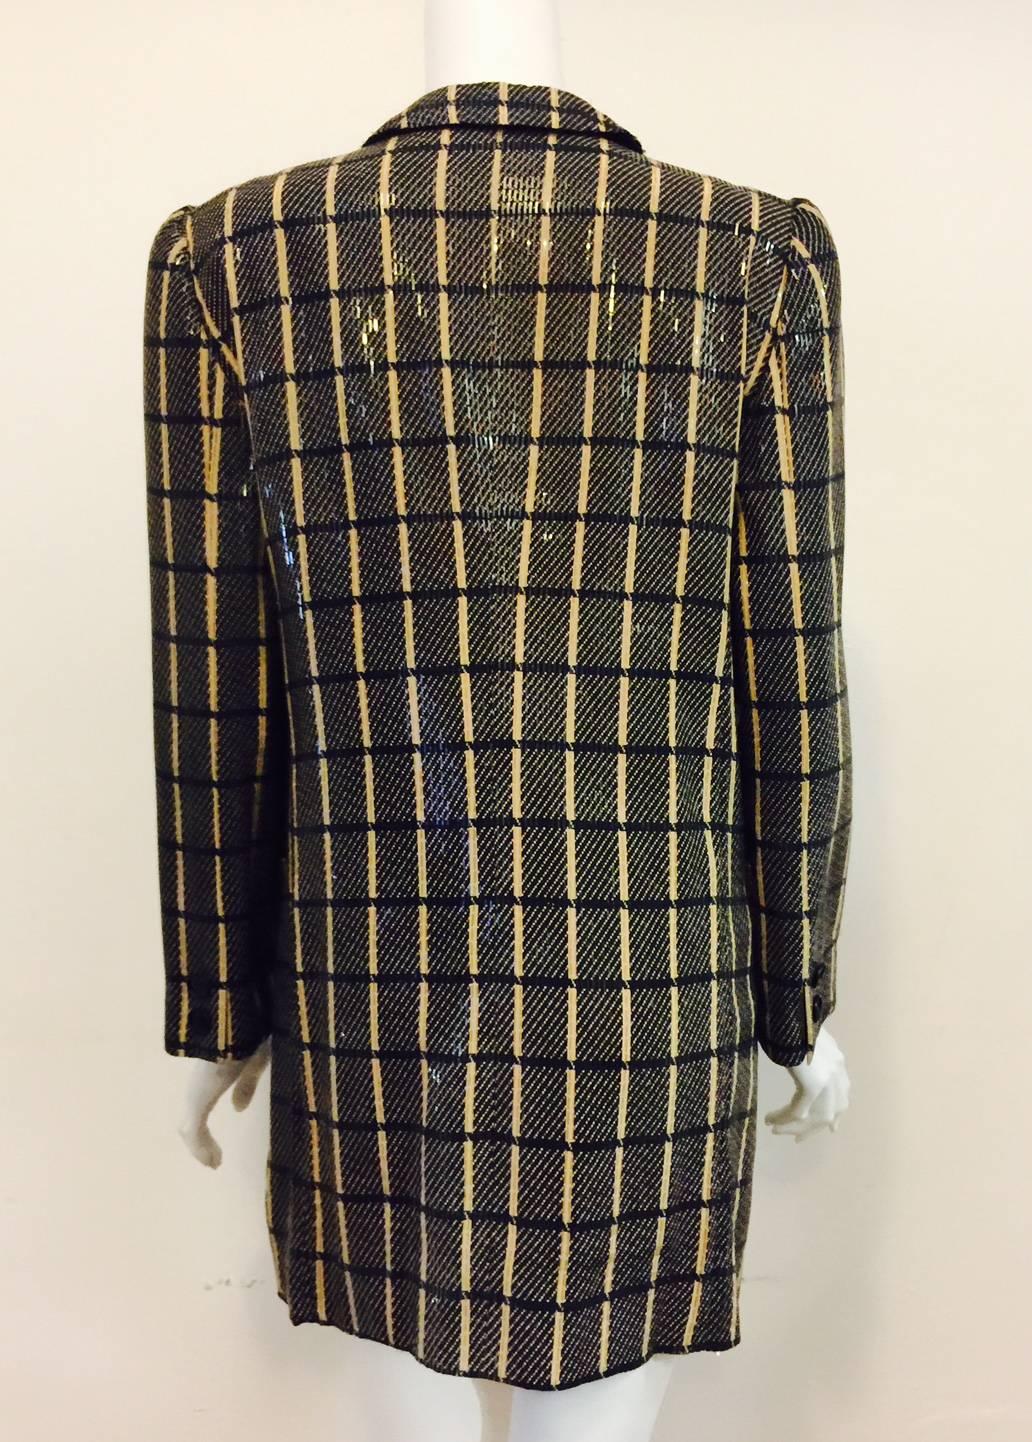 Giorgio Armani Black and Tan Window Pane Evening Jacket With Rectangular Sequins In Excellent Condition For Sale In Palm Beach, FL